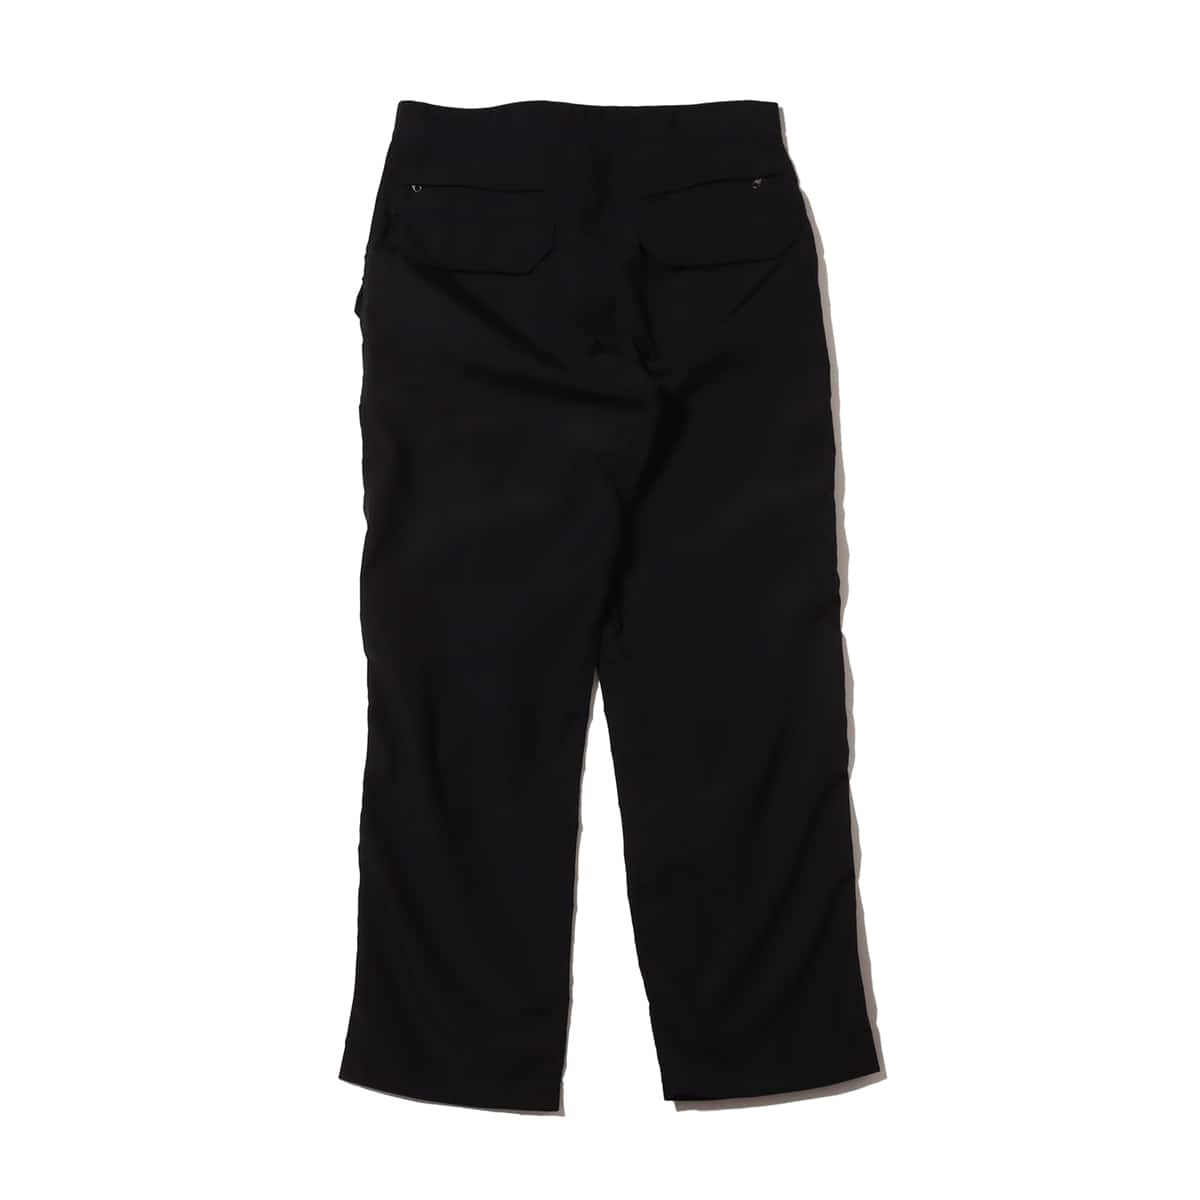 THE NORTH FACE PURPLE LABEL Polyester Wool Ripstop Trail Pants Black 23SS-I